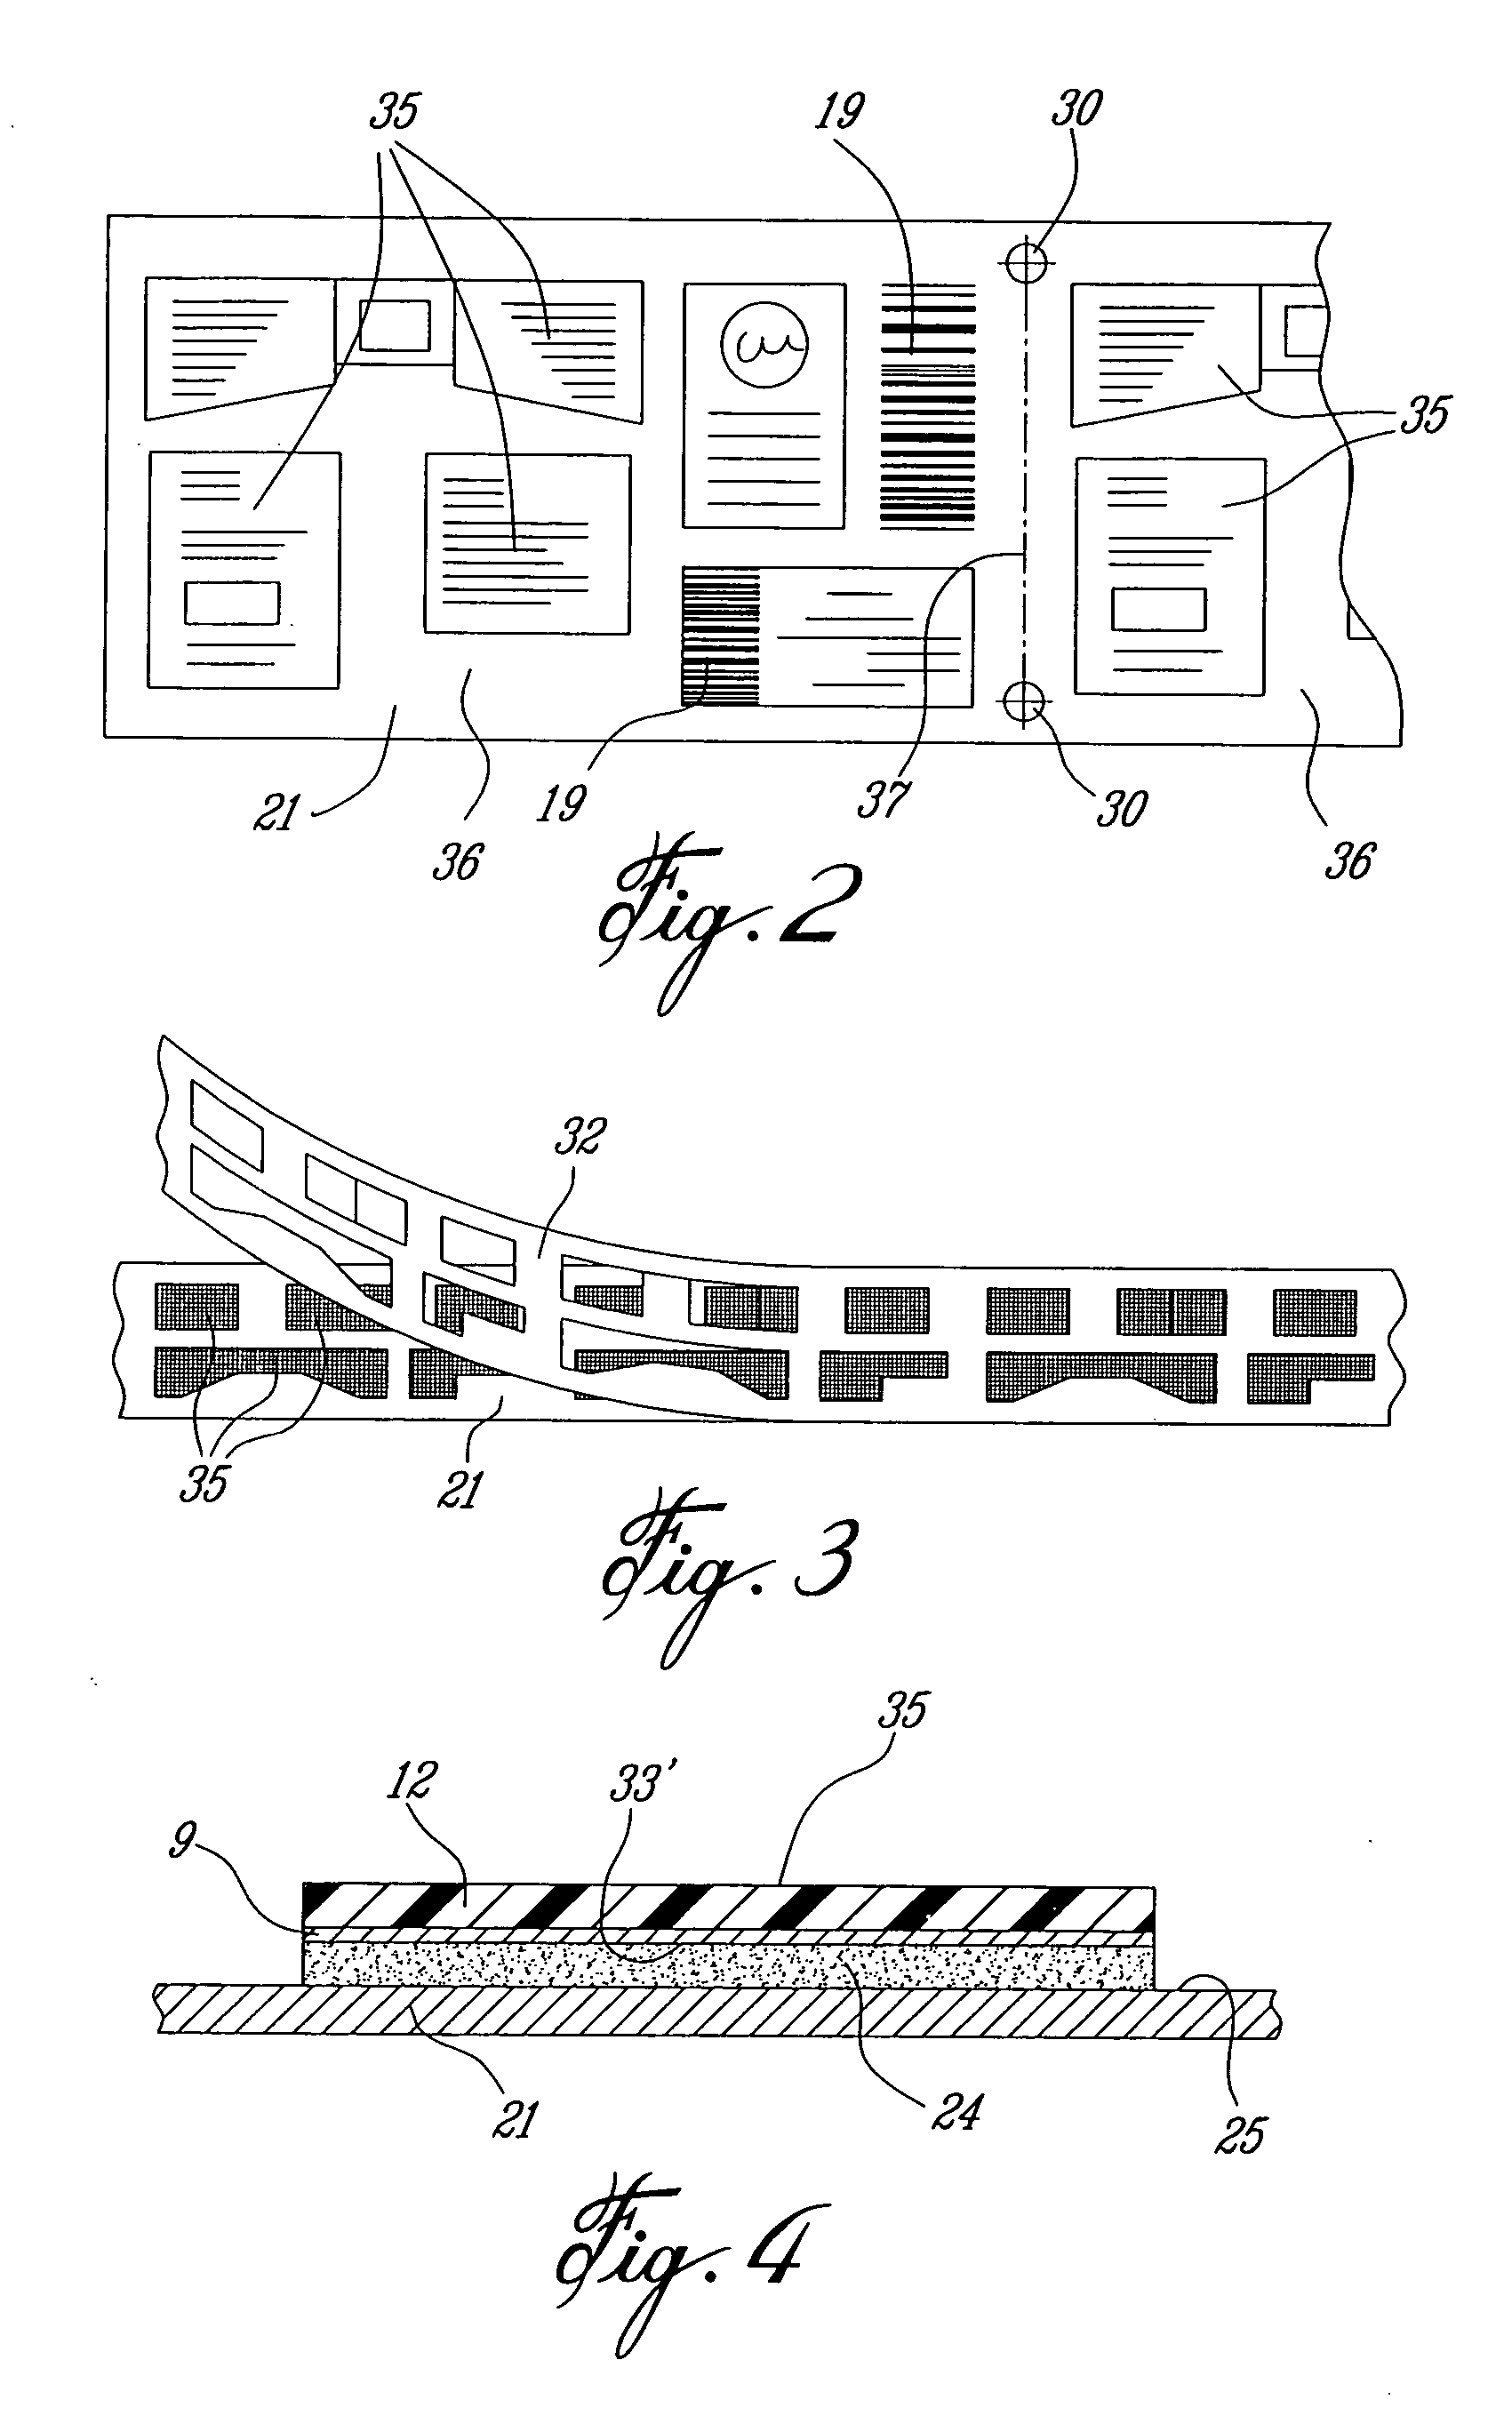 Method and system for manufacturing label kits comprised of carrier sheets having labels of specific shape removably retained thereon